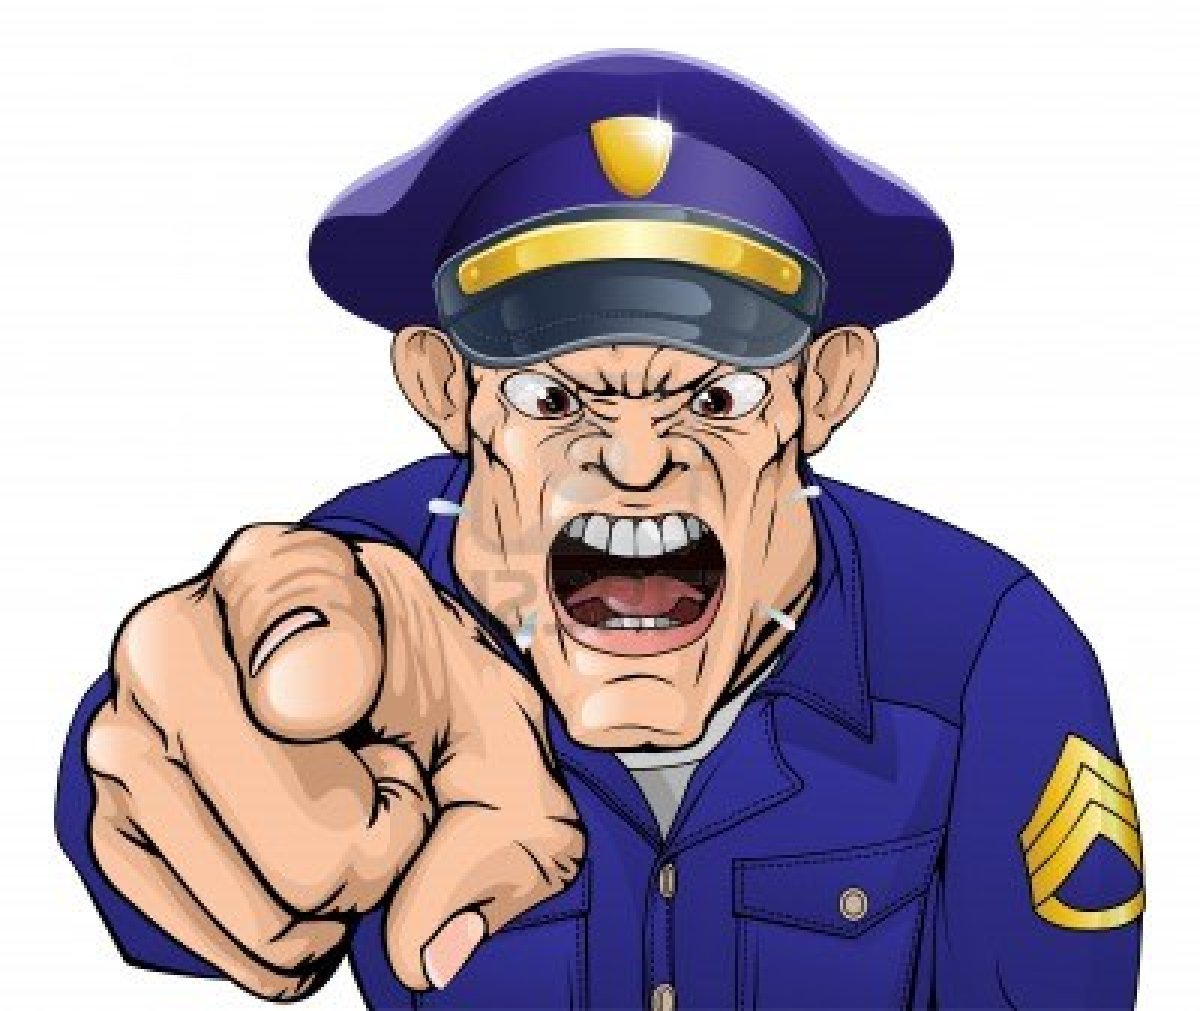 13198155 Illustration Of A Cartoon Angry Policeman Cop Or Security